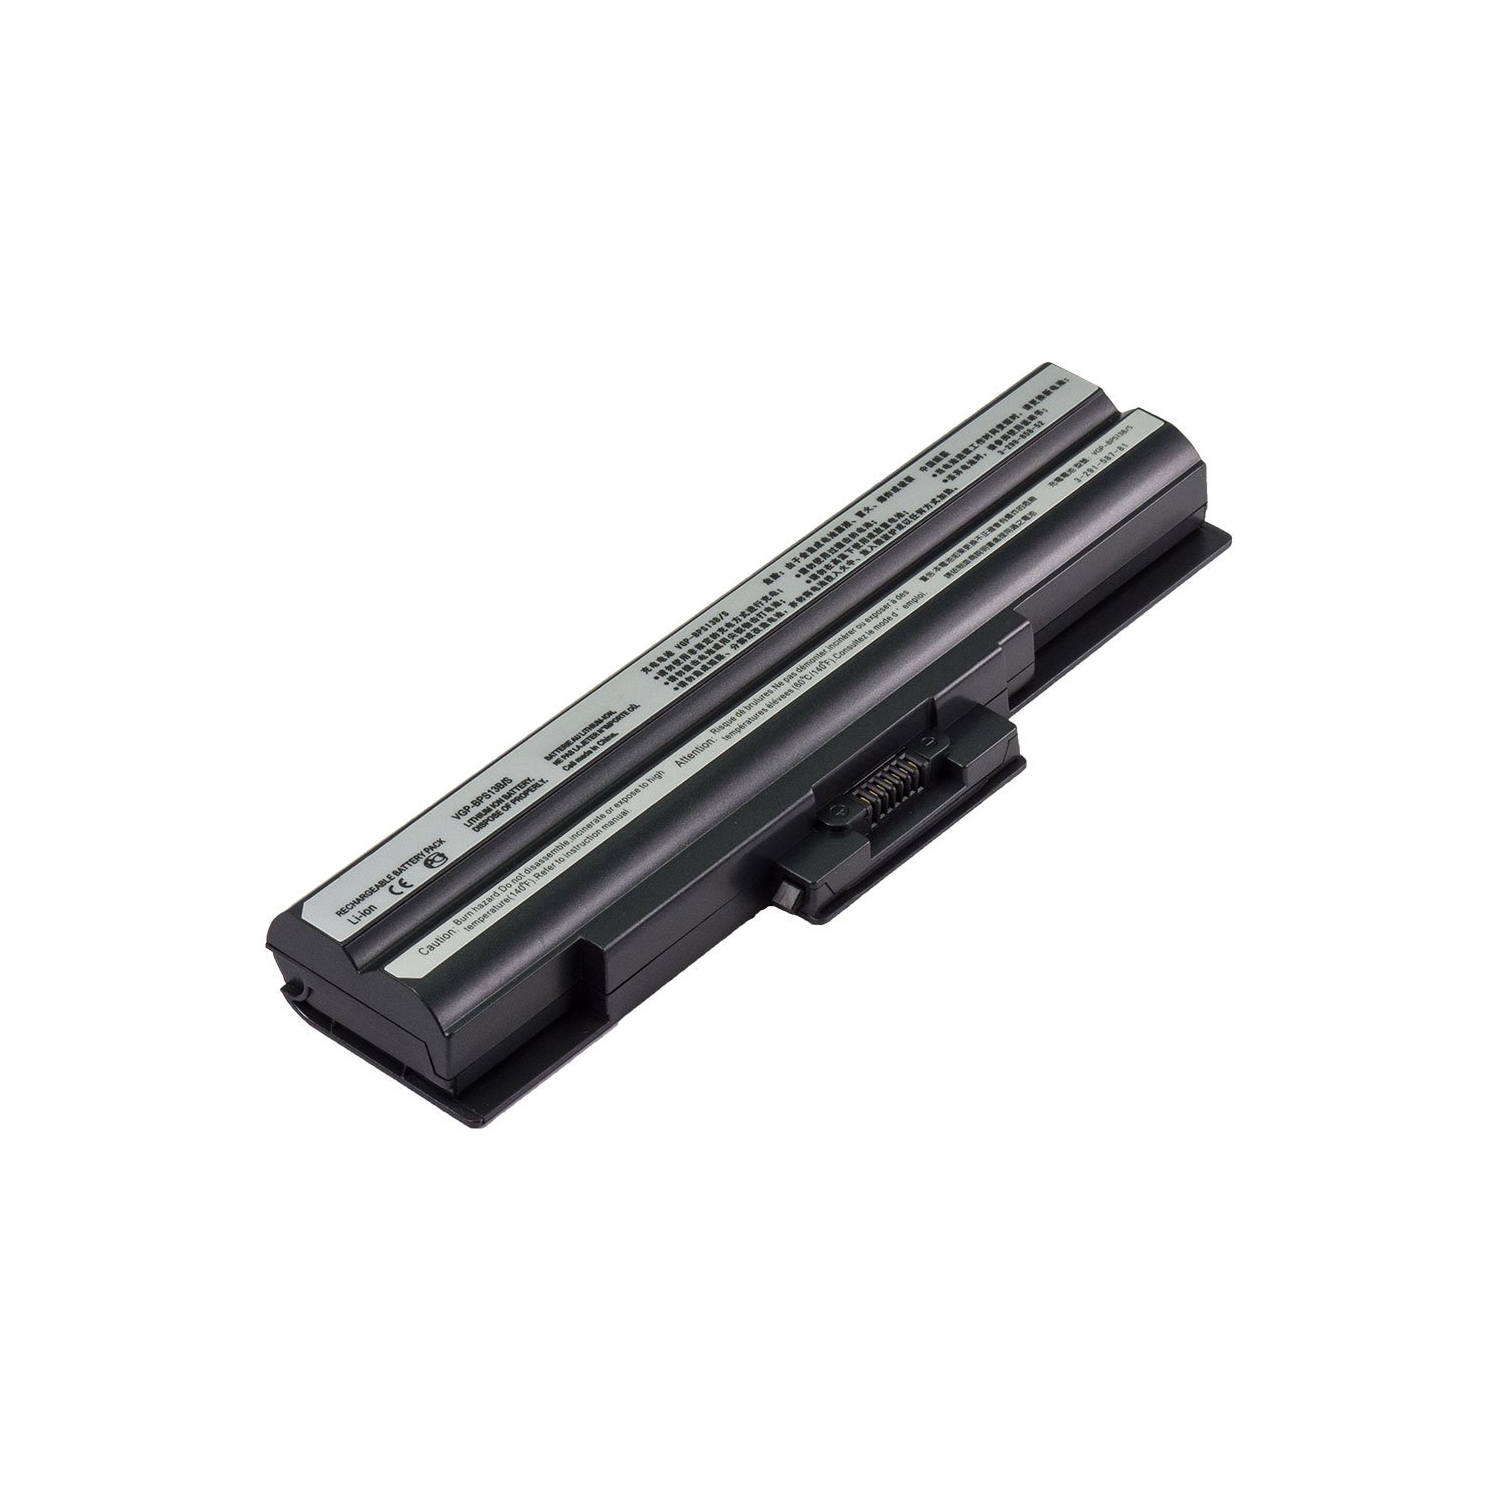 Laptop Battery Replacement for Sony VAIO VGN-AW290JGQ, VGP-BPL13, VGP-BPS13/Q, VGP-BPS13A/B, VGP-BPS13A/S, VGP-BPS13A